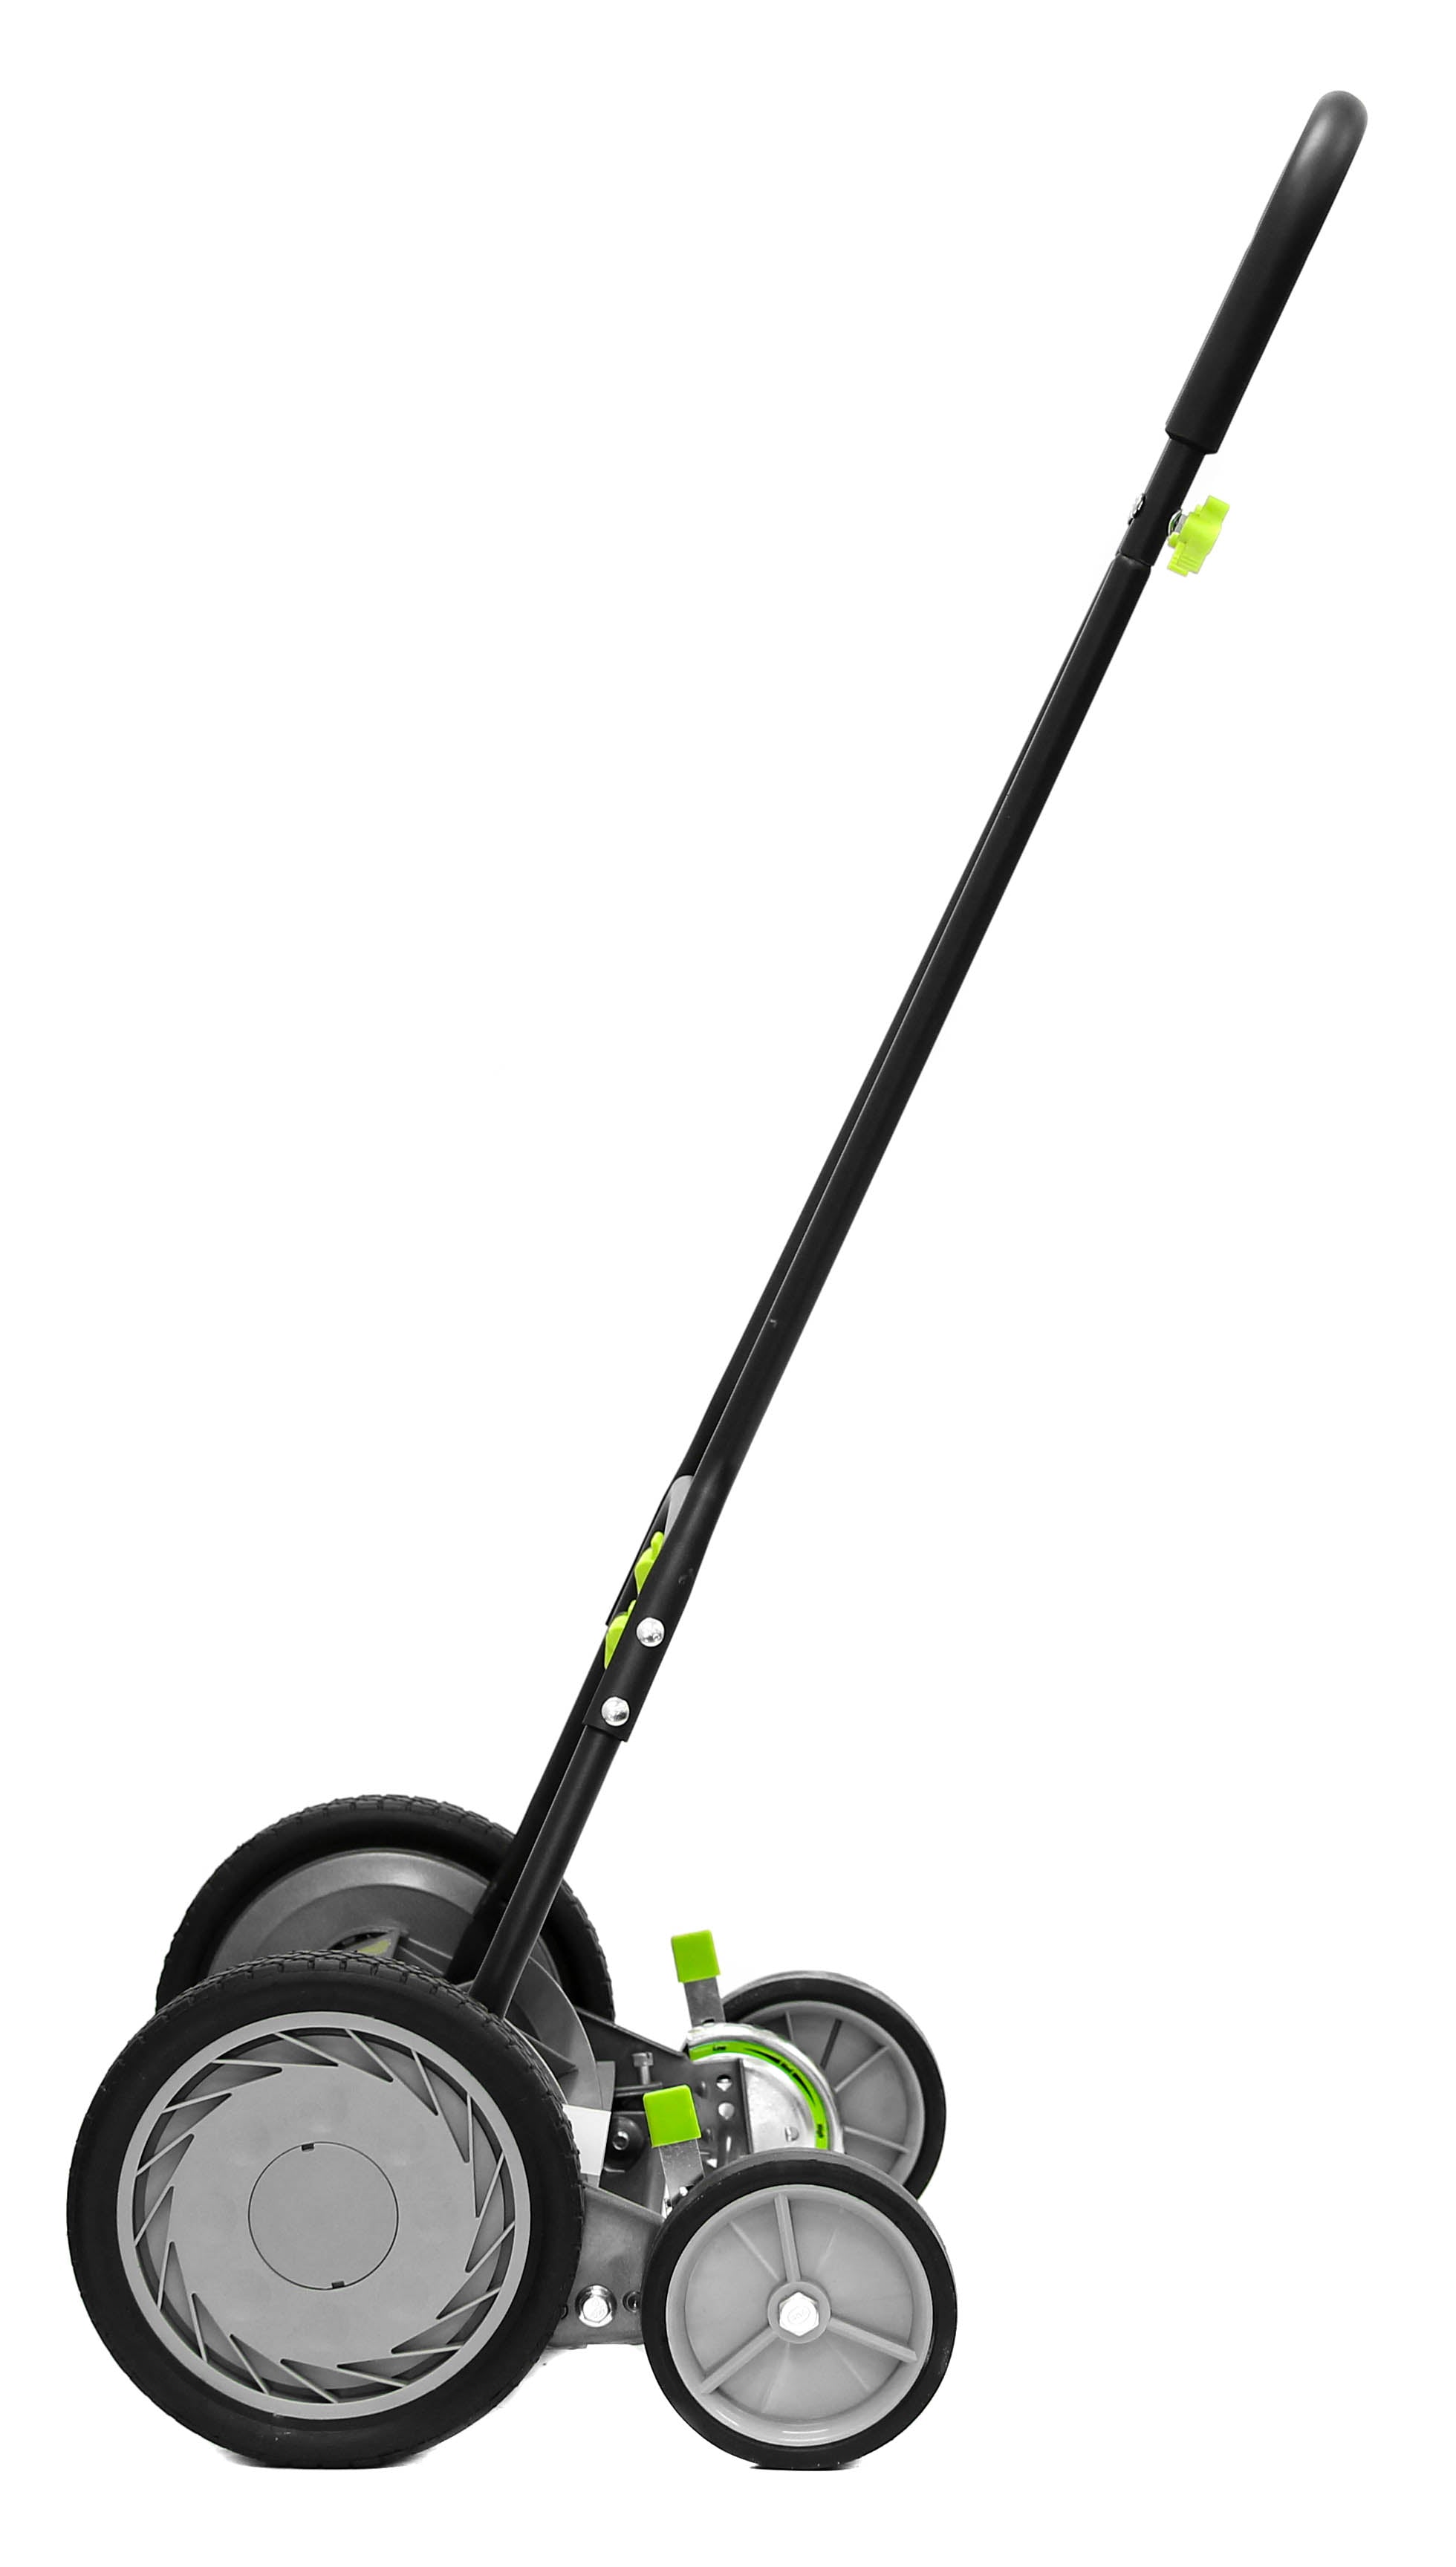 Earthwise Power Tools by ALM 18 Manual Reel Mower with Trailing Wheel –  American Lawn Mower Co. EST 1895